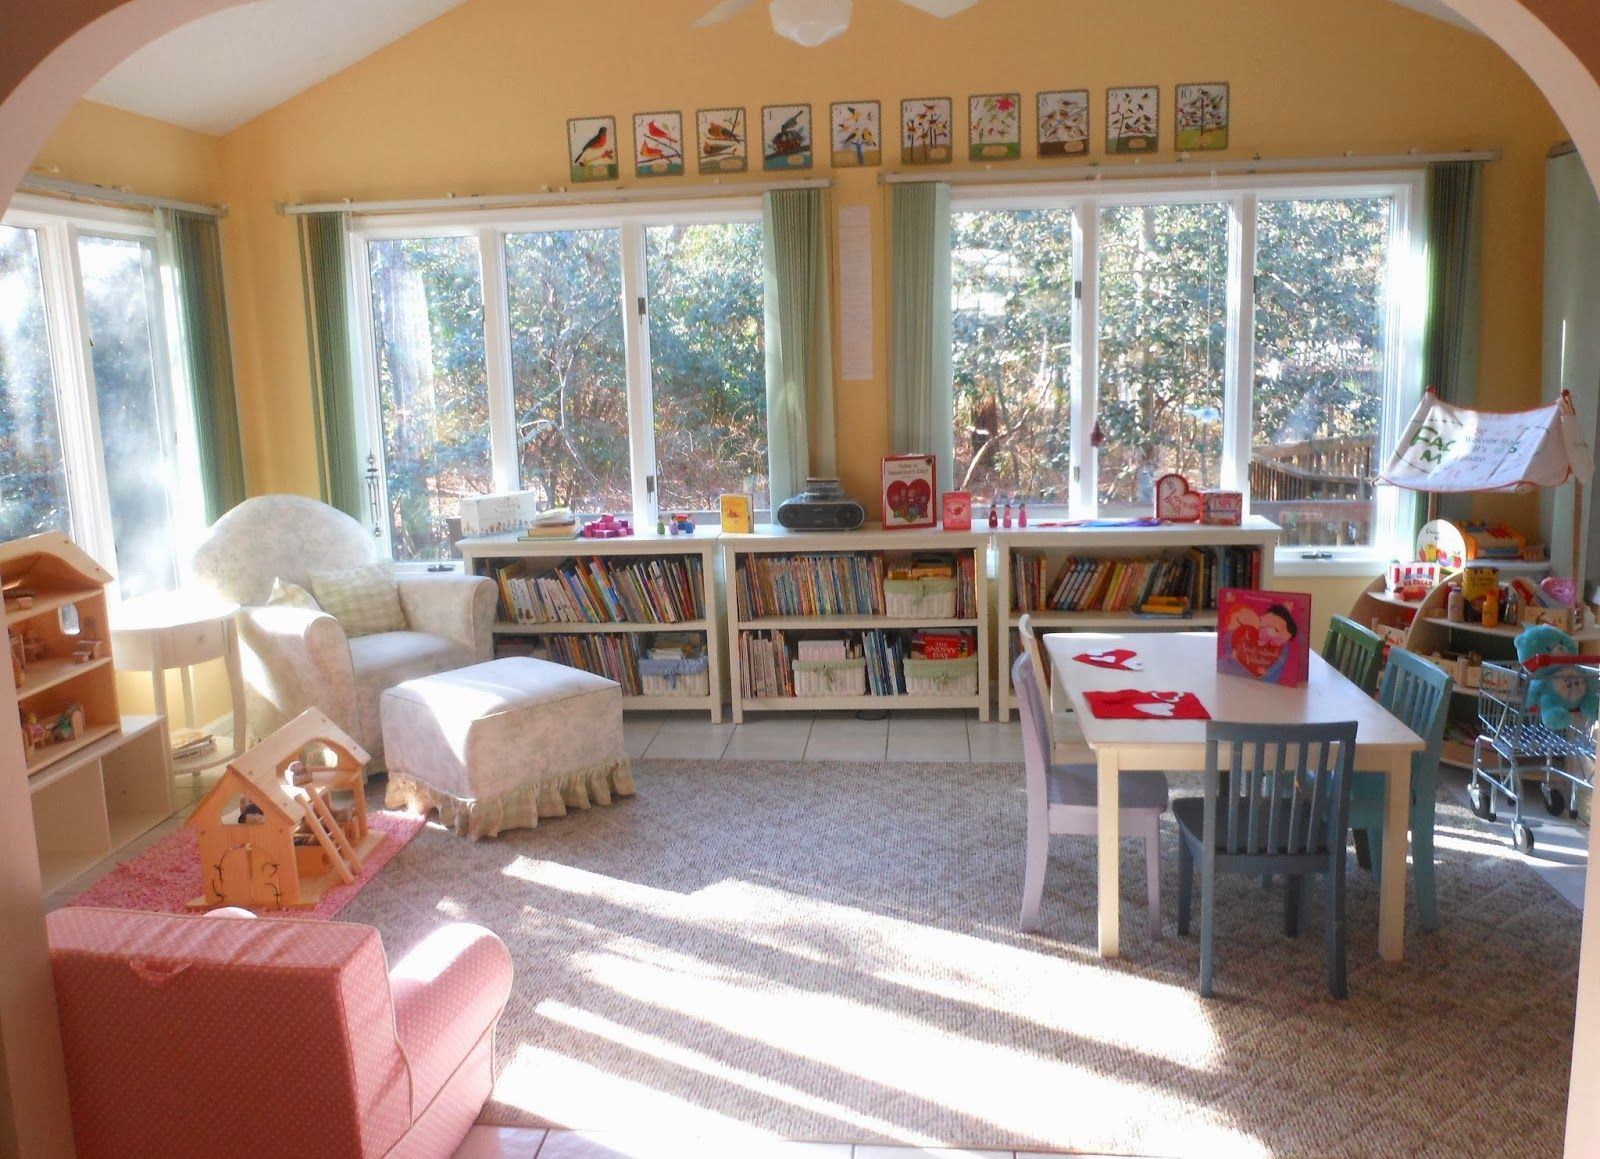 Room Tours For Kids
 Homeschooling Room Tour for 2014 from Natural Beach Living